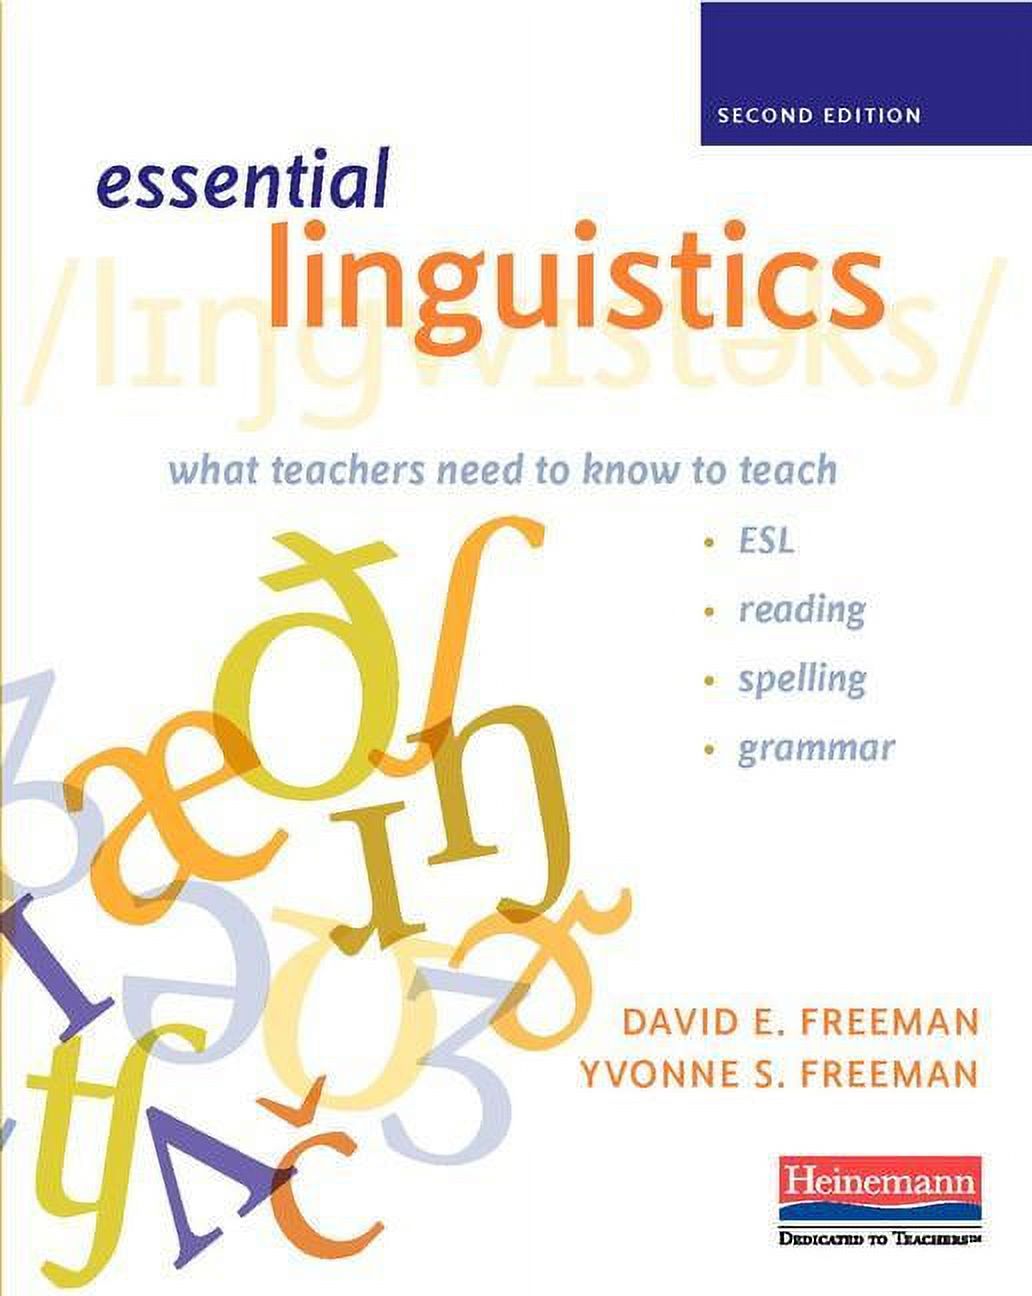 Linguistics,　to　Spelling,　Edition:　What　Reading,　(Paperback)　Teach　Know　Essential　Need　to　Teachers　Second　Grammar　Esl,　and